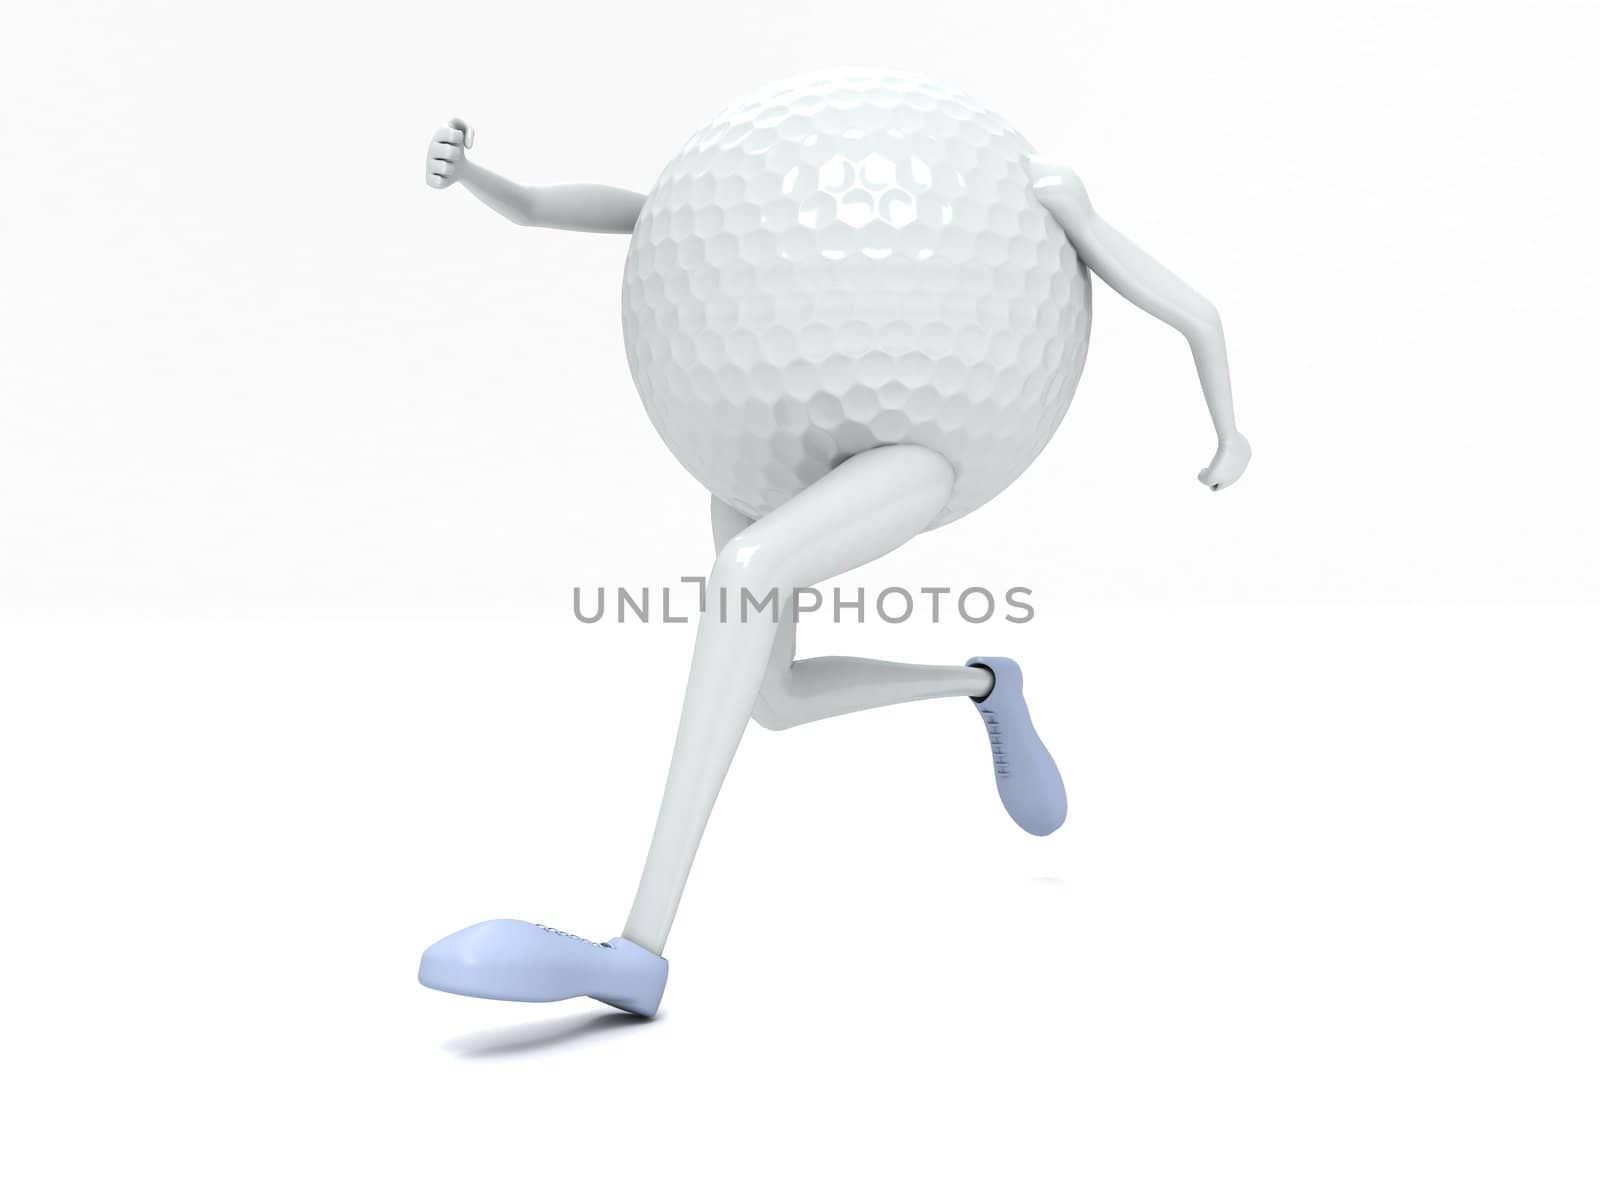 three dimensional front view of running golf ball by imagerymajestic